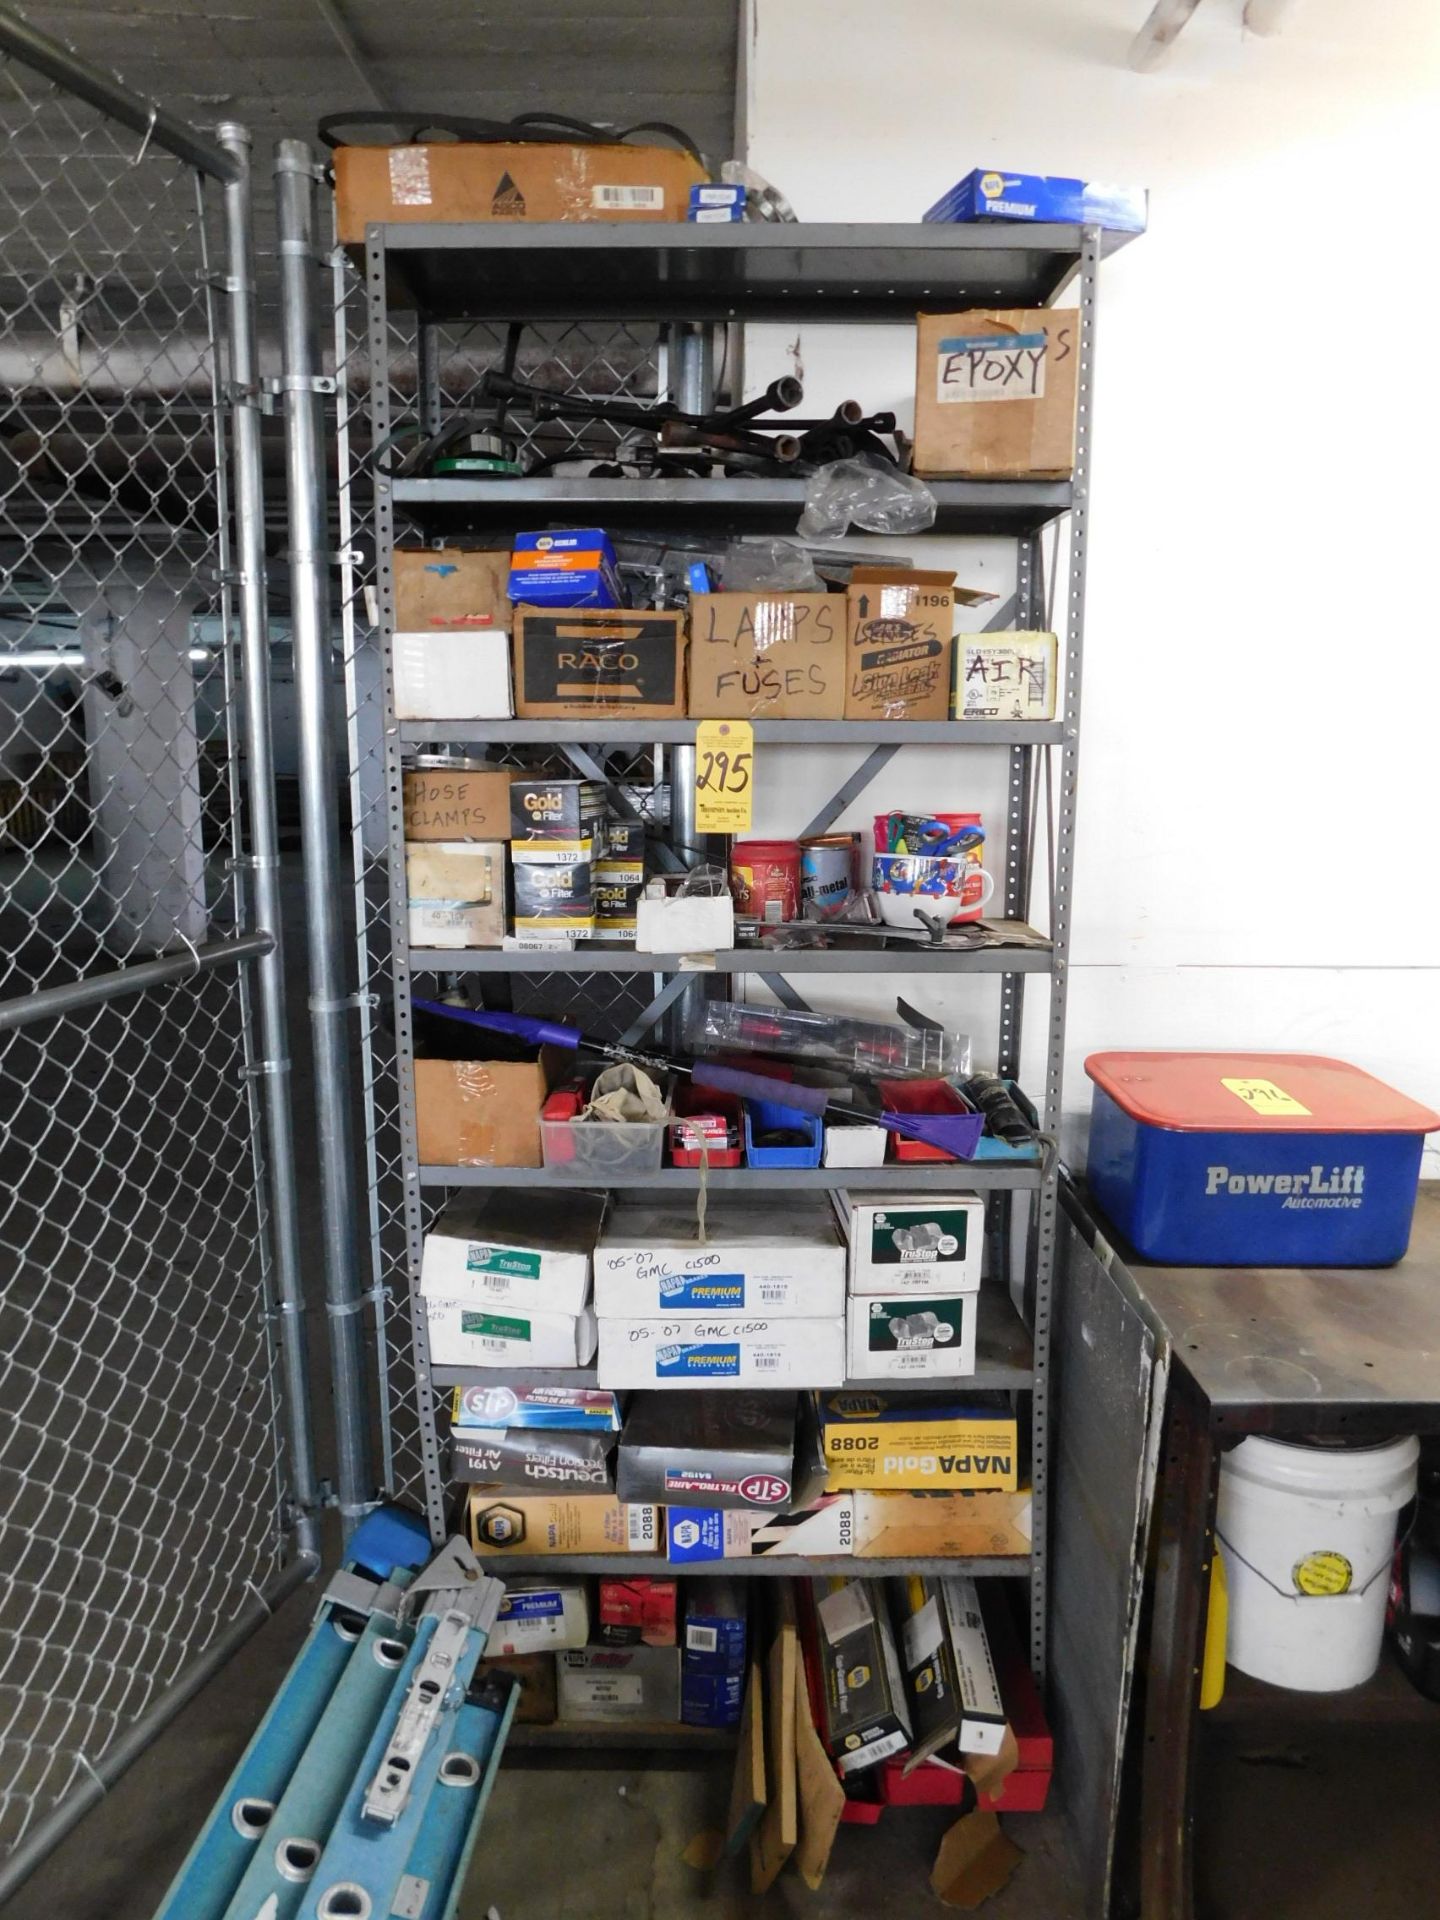 Shelving & Contents of Automotive related items